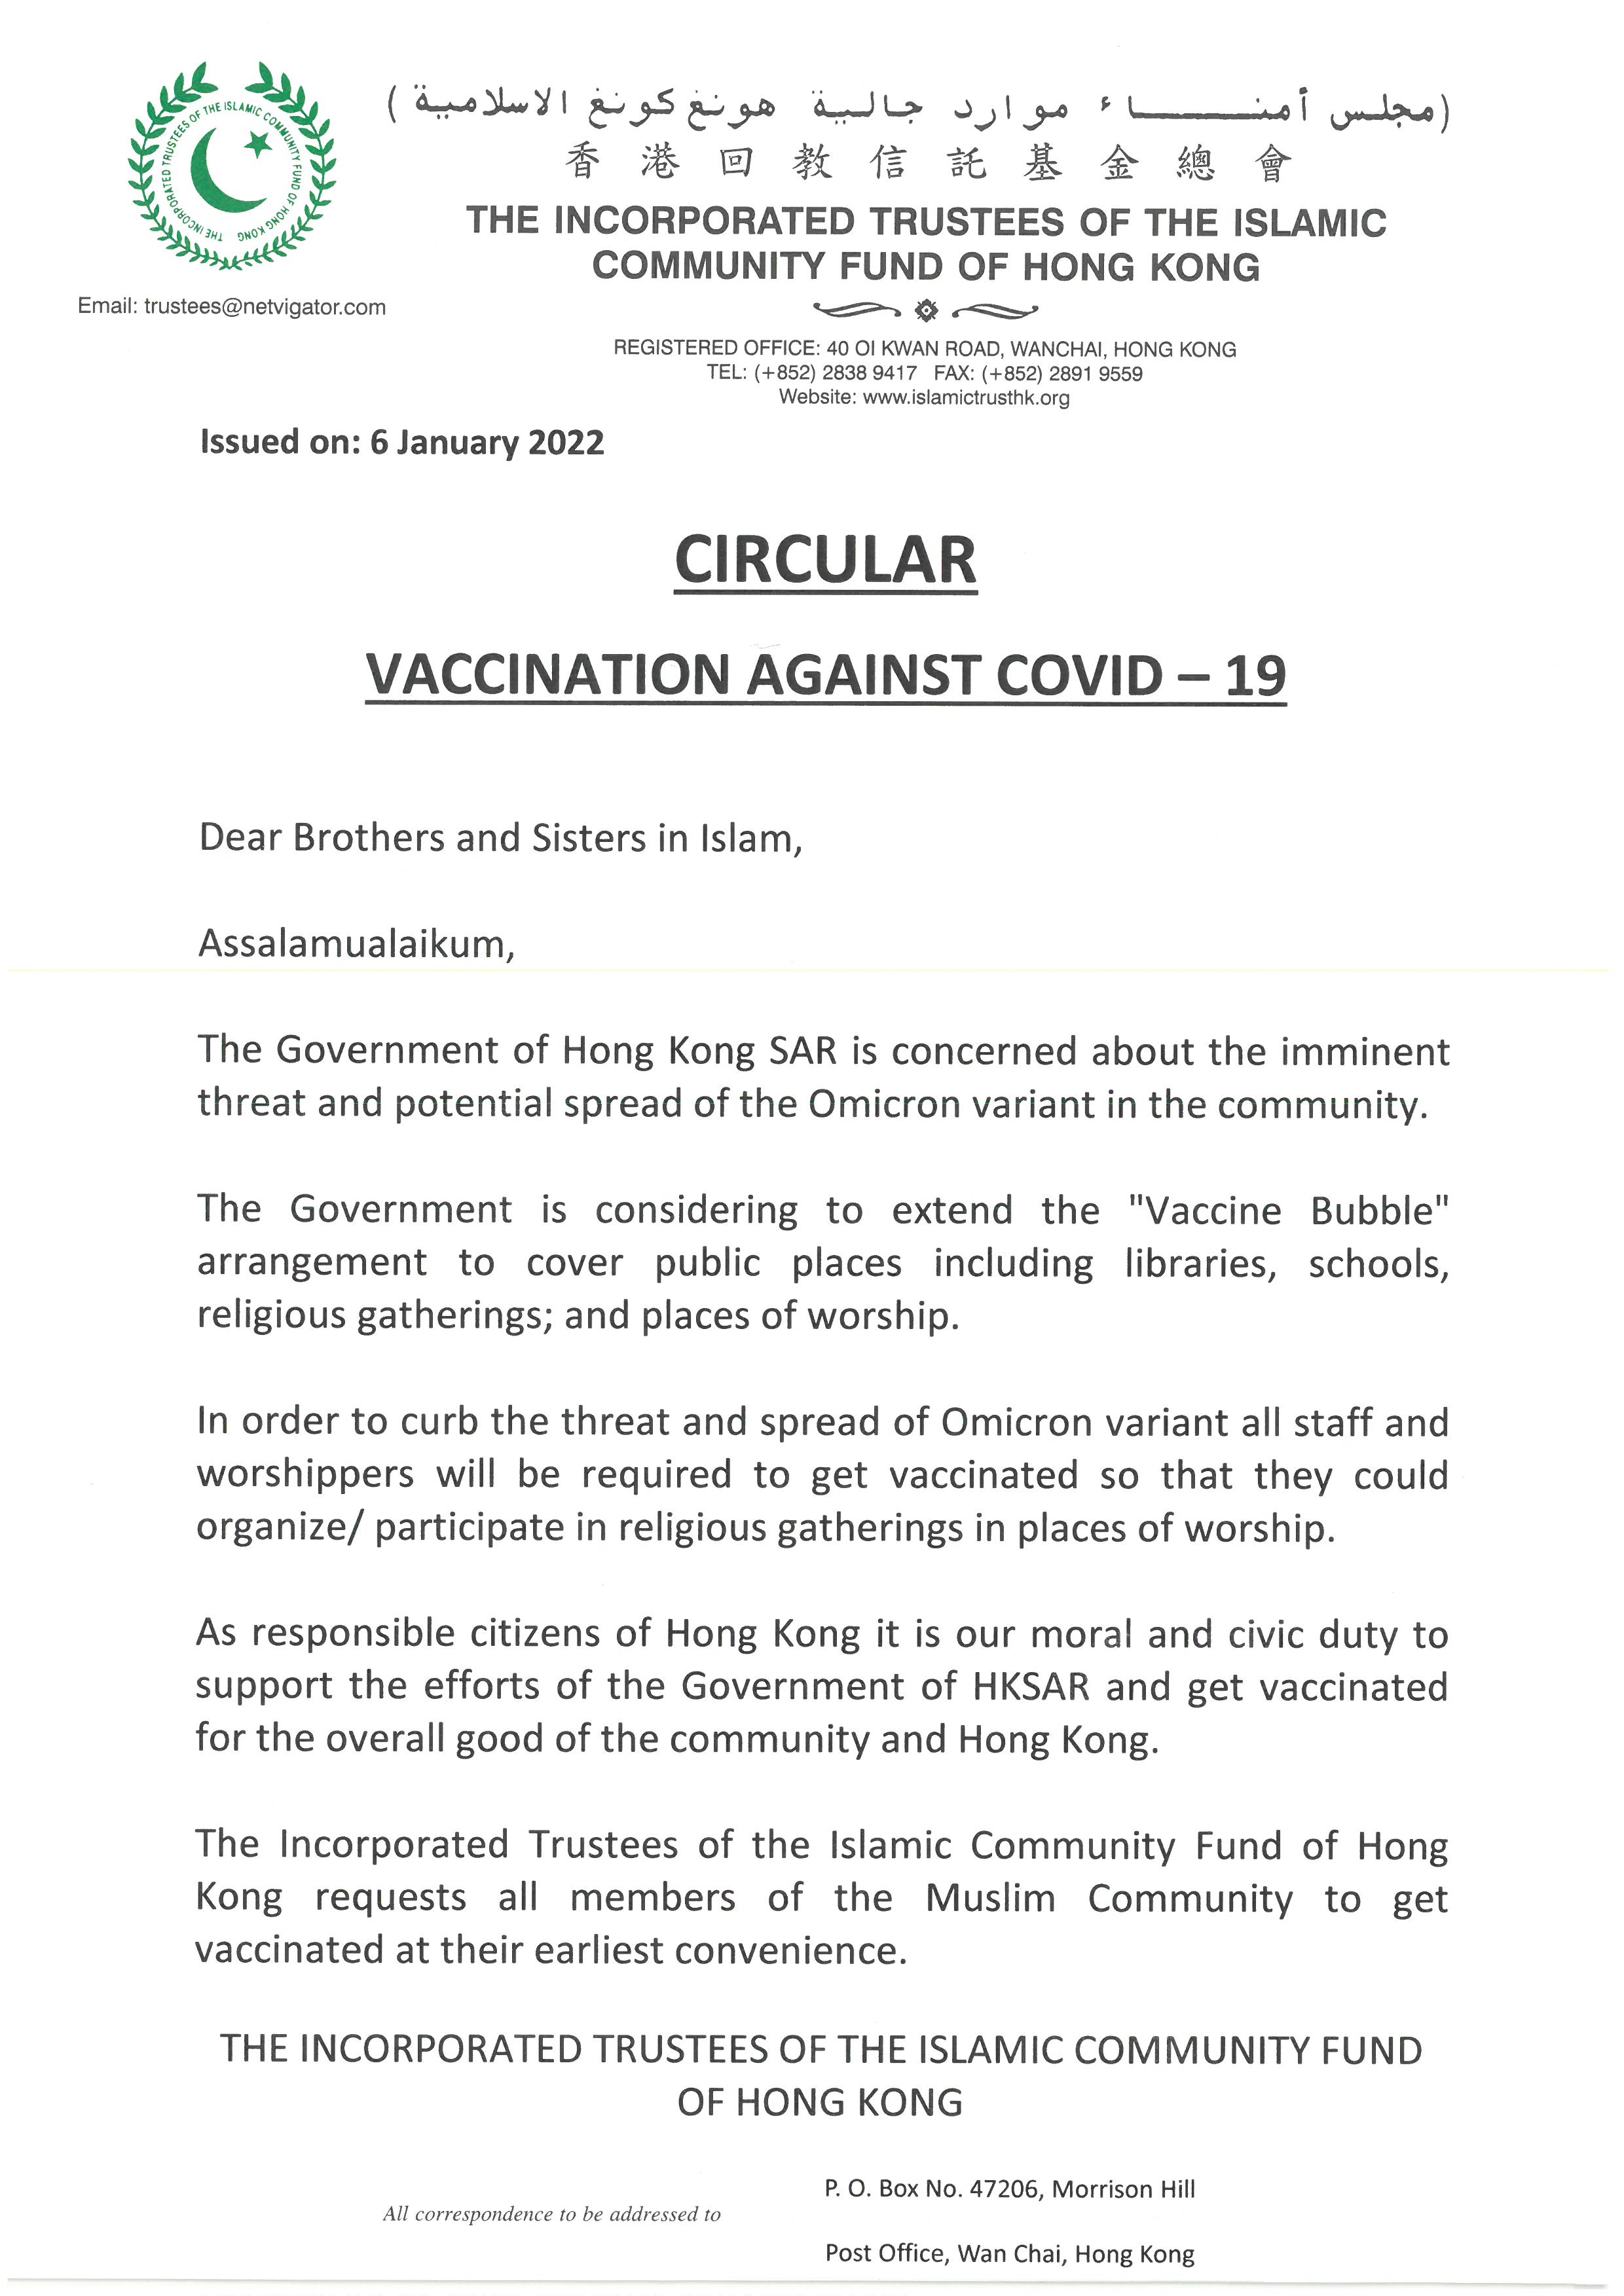 Message from BOT: VACCINATION AGAINST COVID-19